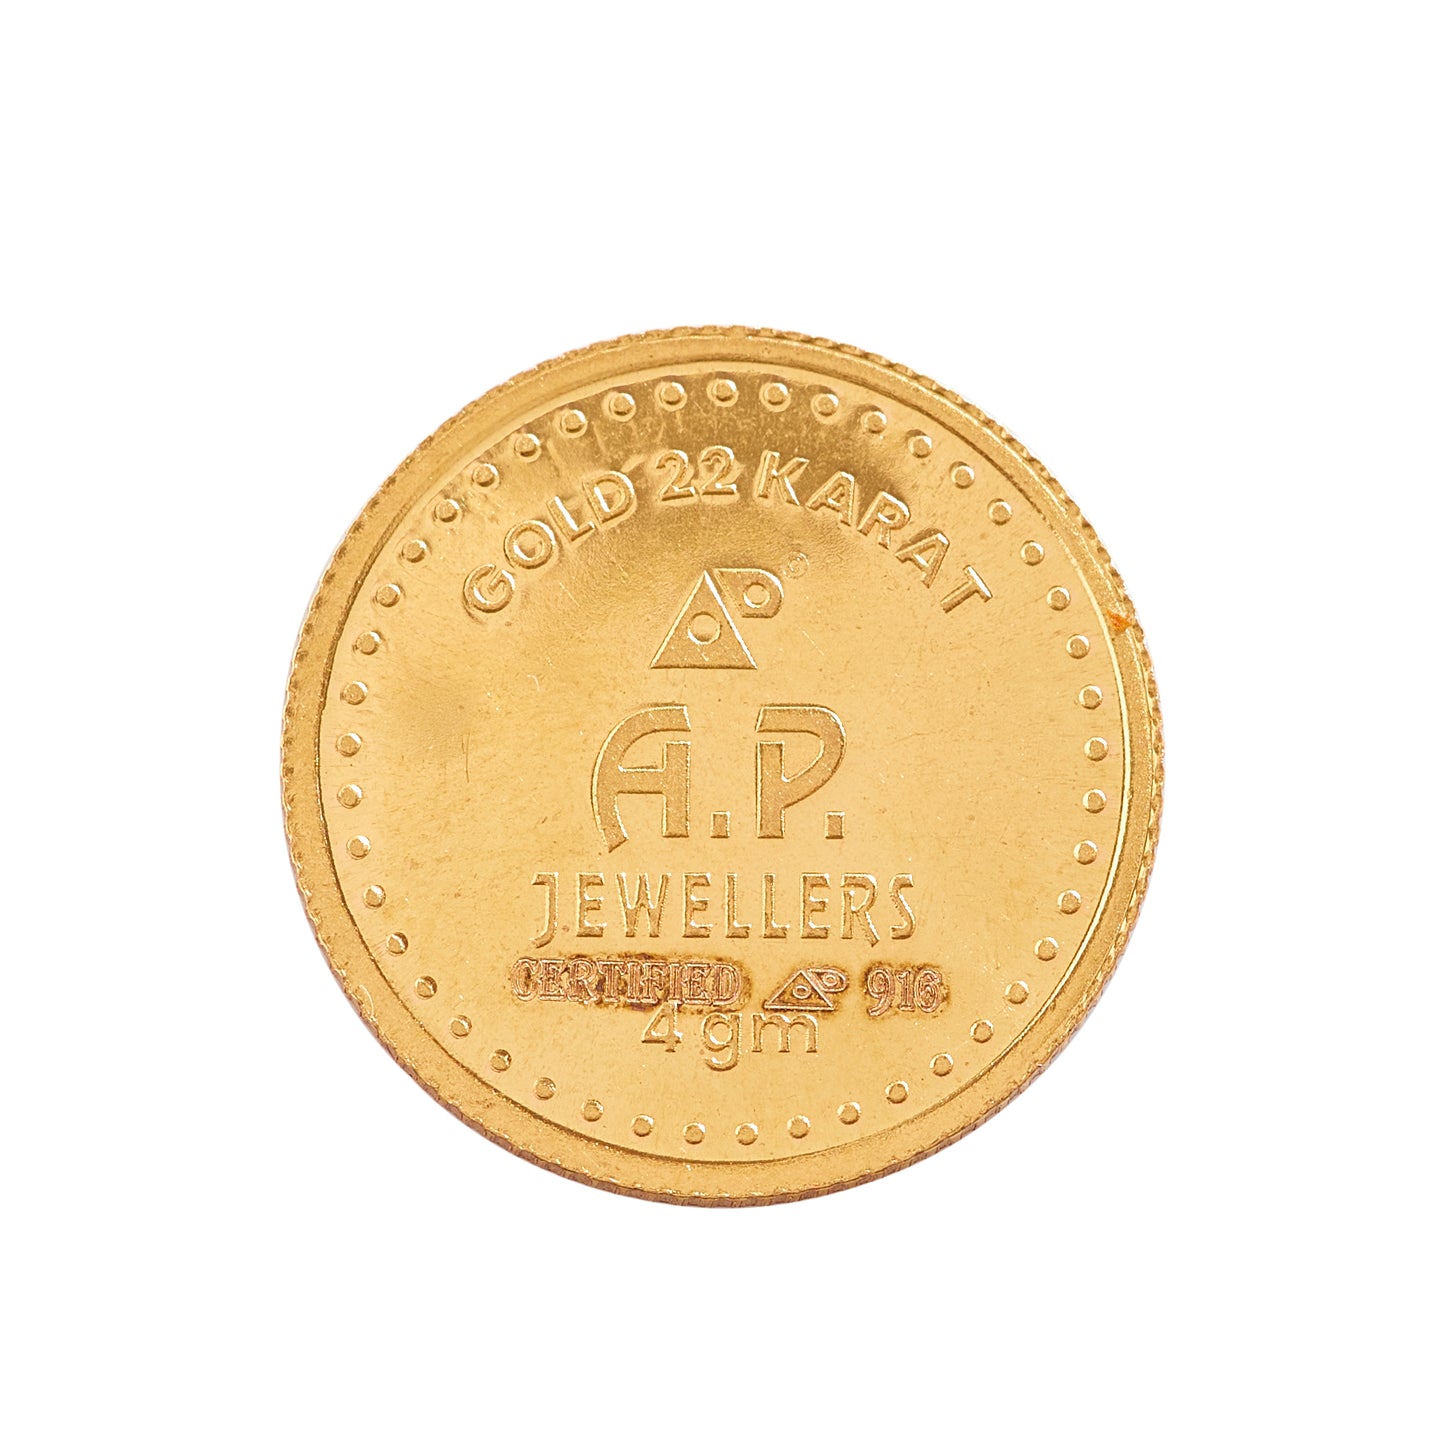 Gold coin 4gm